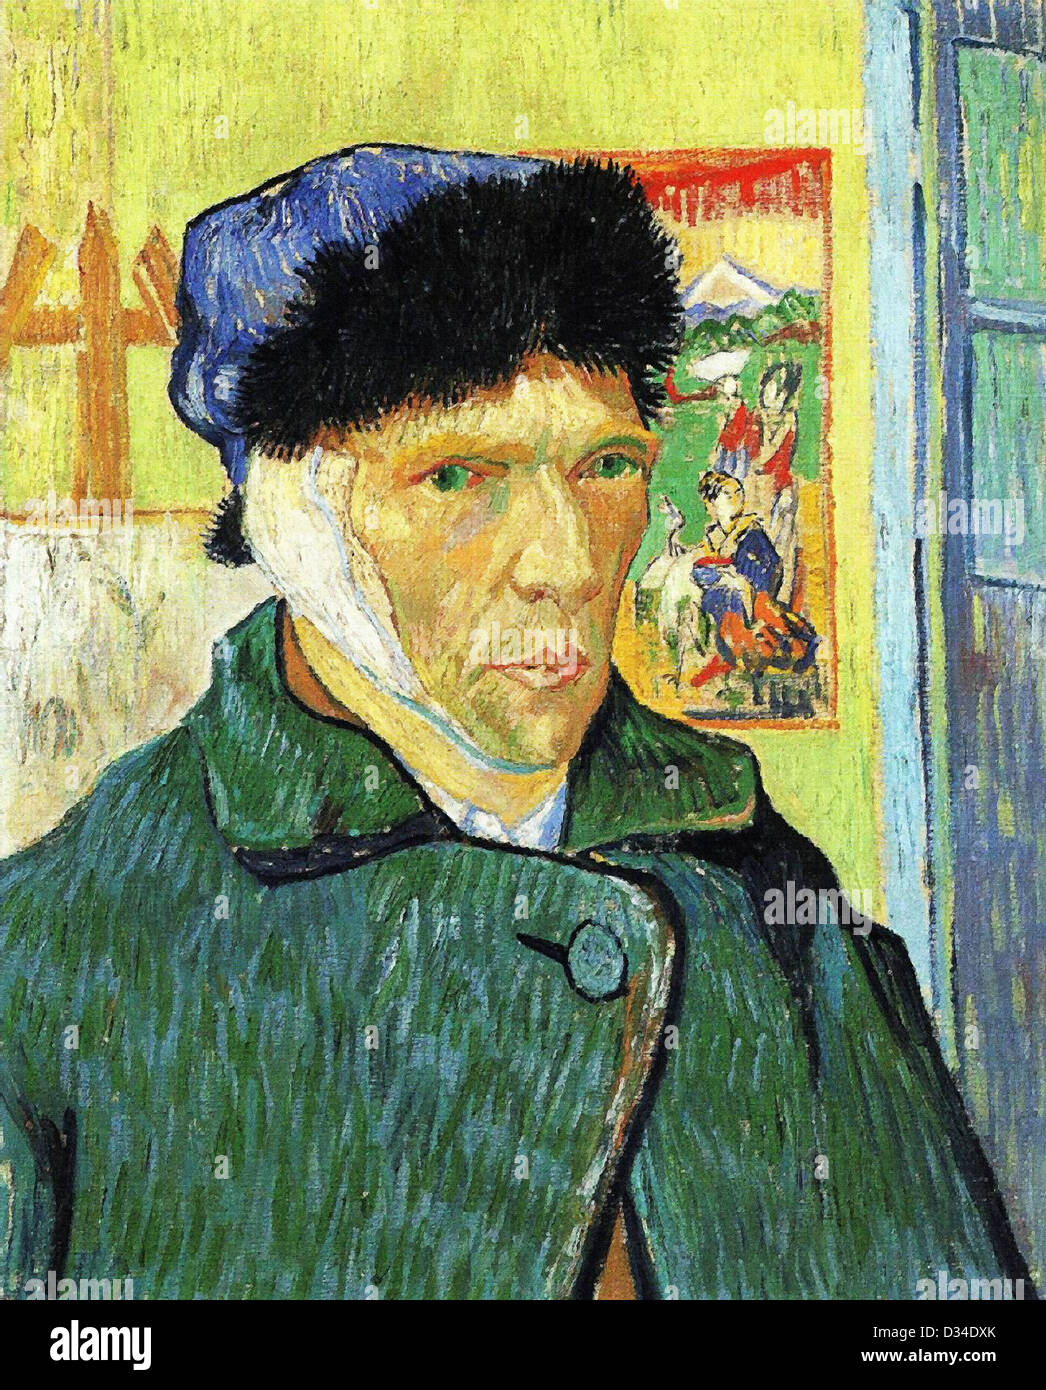 Vincent van Gogh, Self Portrait with Bandaged Ear. 1889. Post-Impressionism. Oil on canvas. Courtauld Institute of Art, London Stock Photo